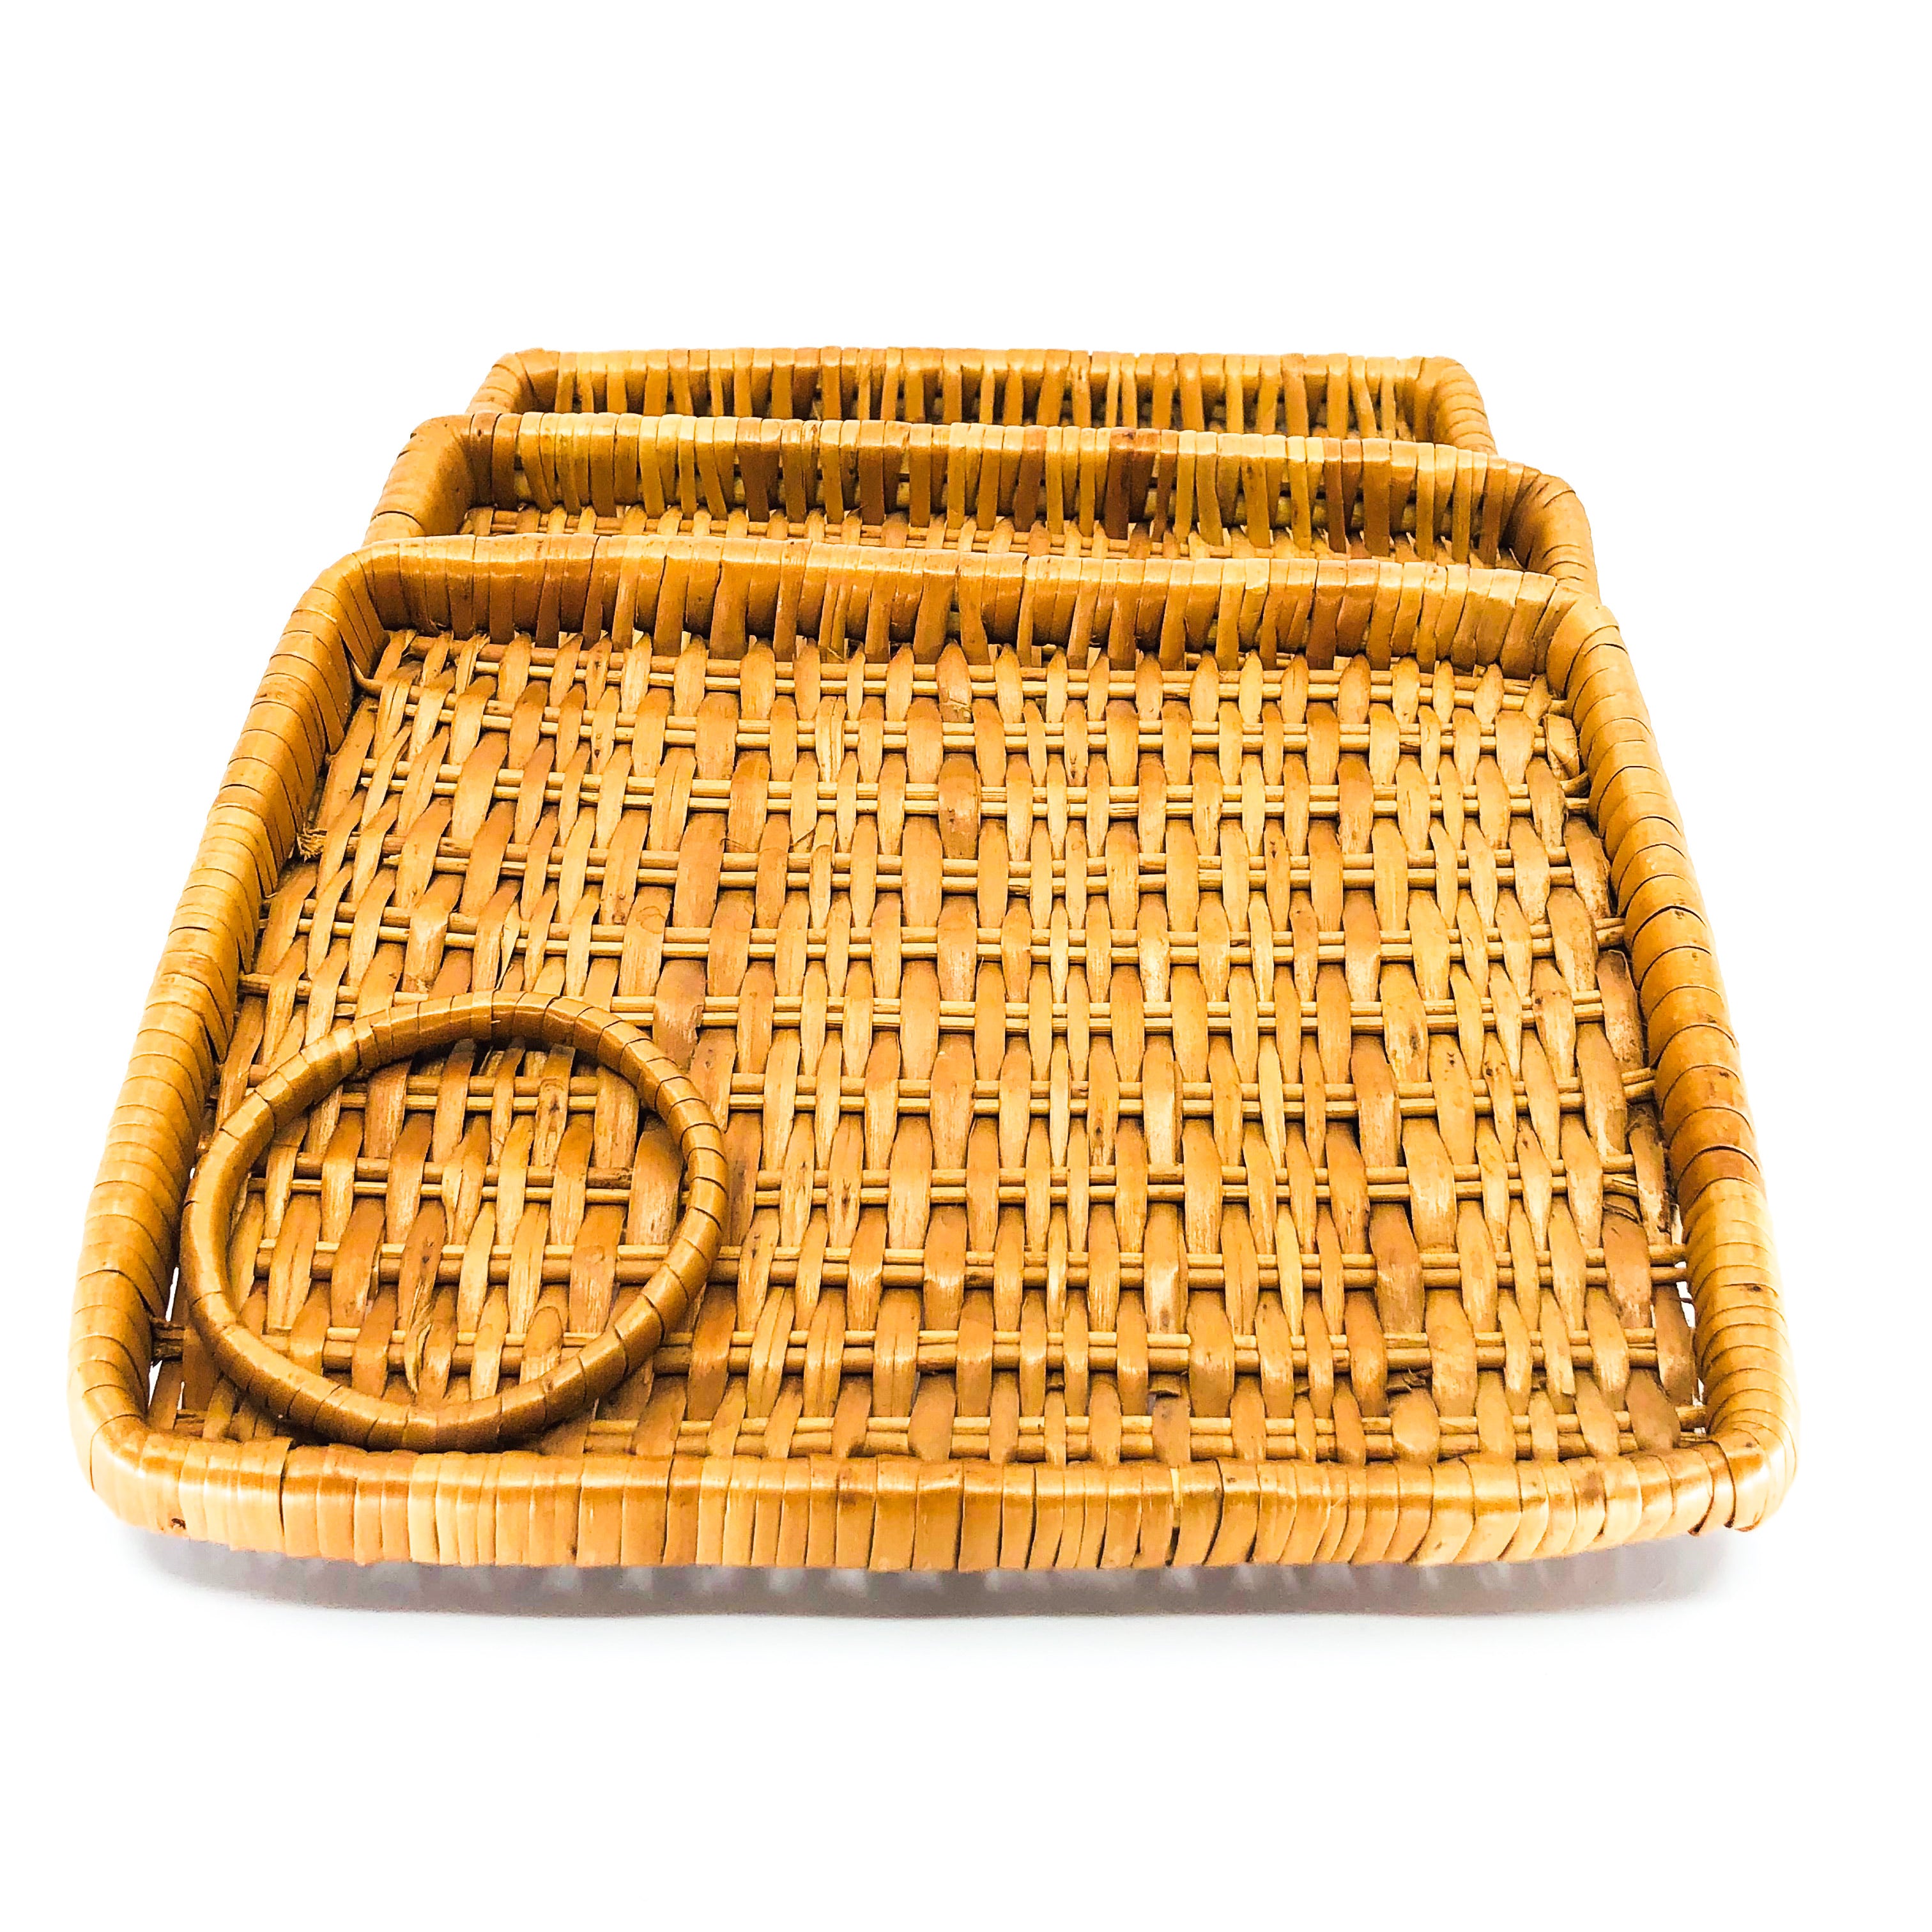 Vintage Small Woven Rattan Rectangle Serving Trays with Cup Holders, Set of 3